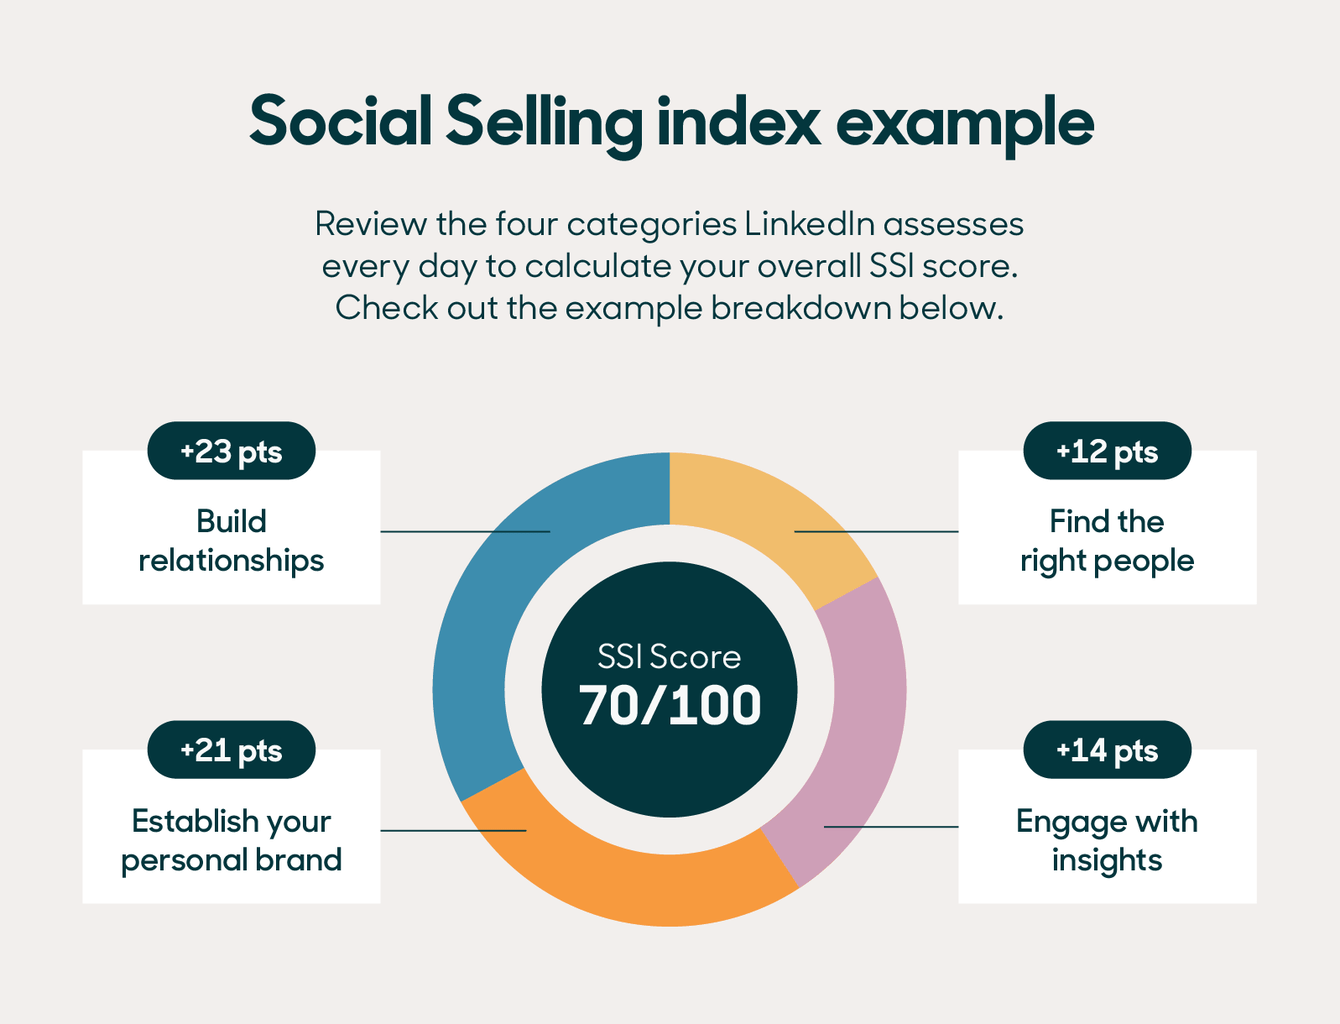 Social selling index example